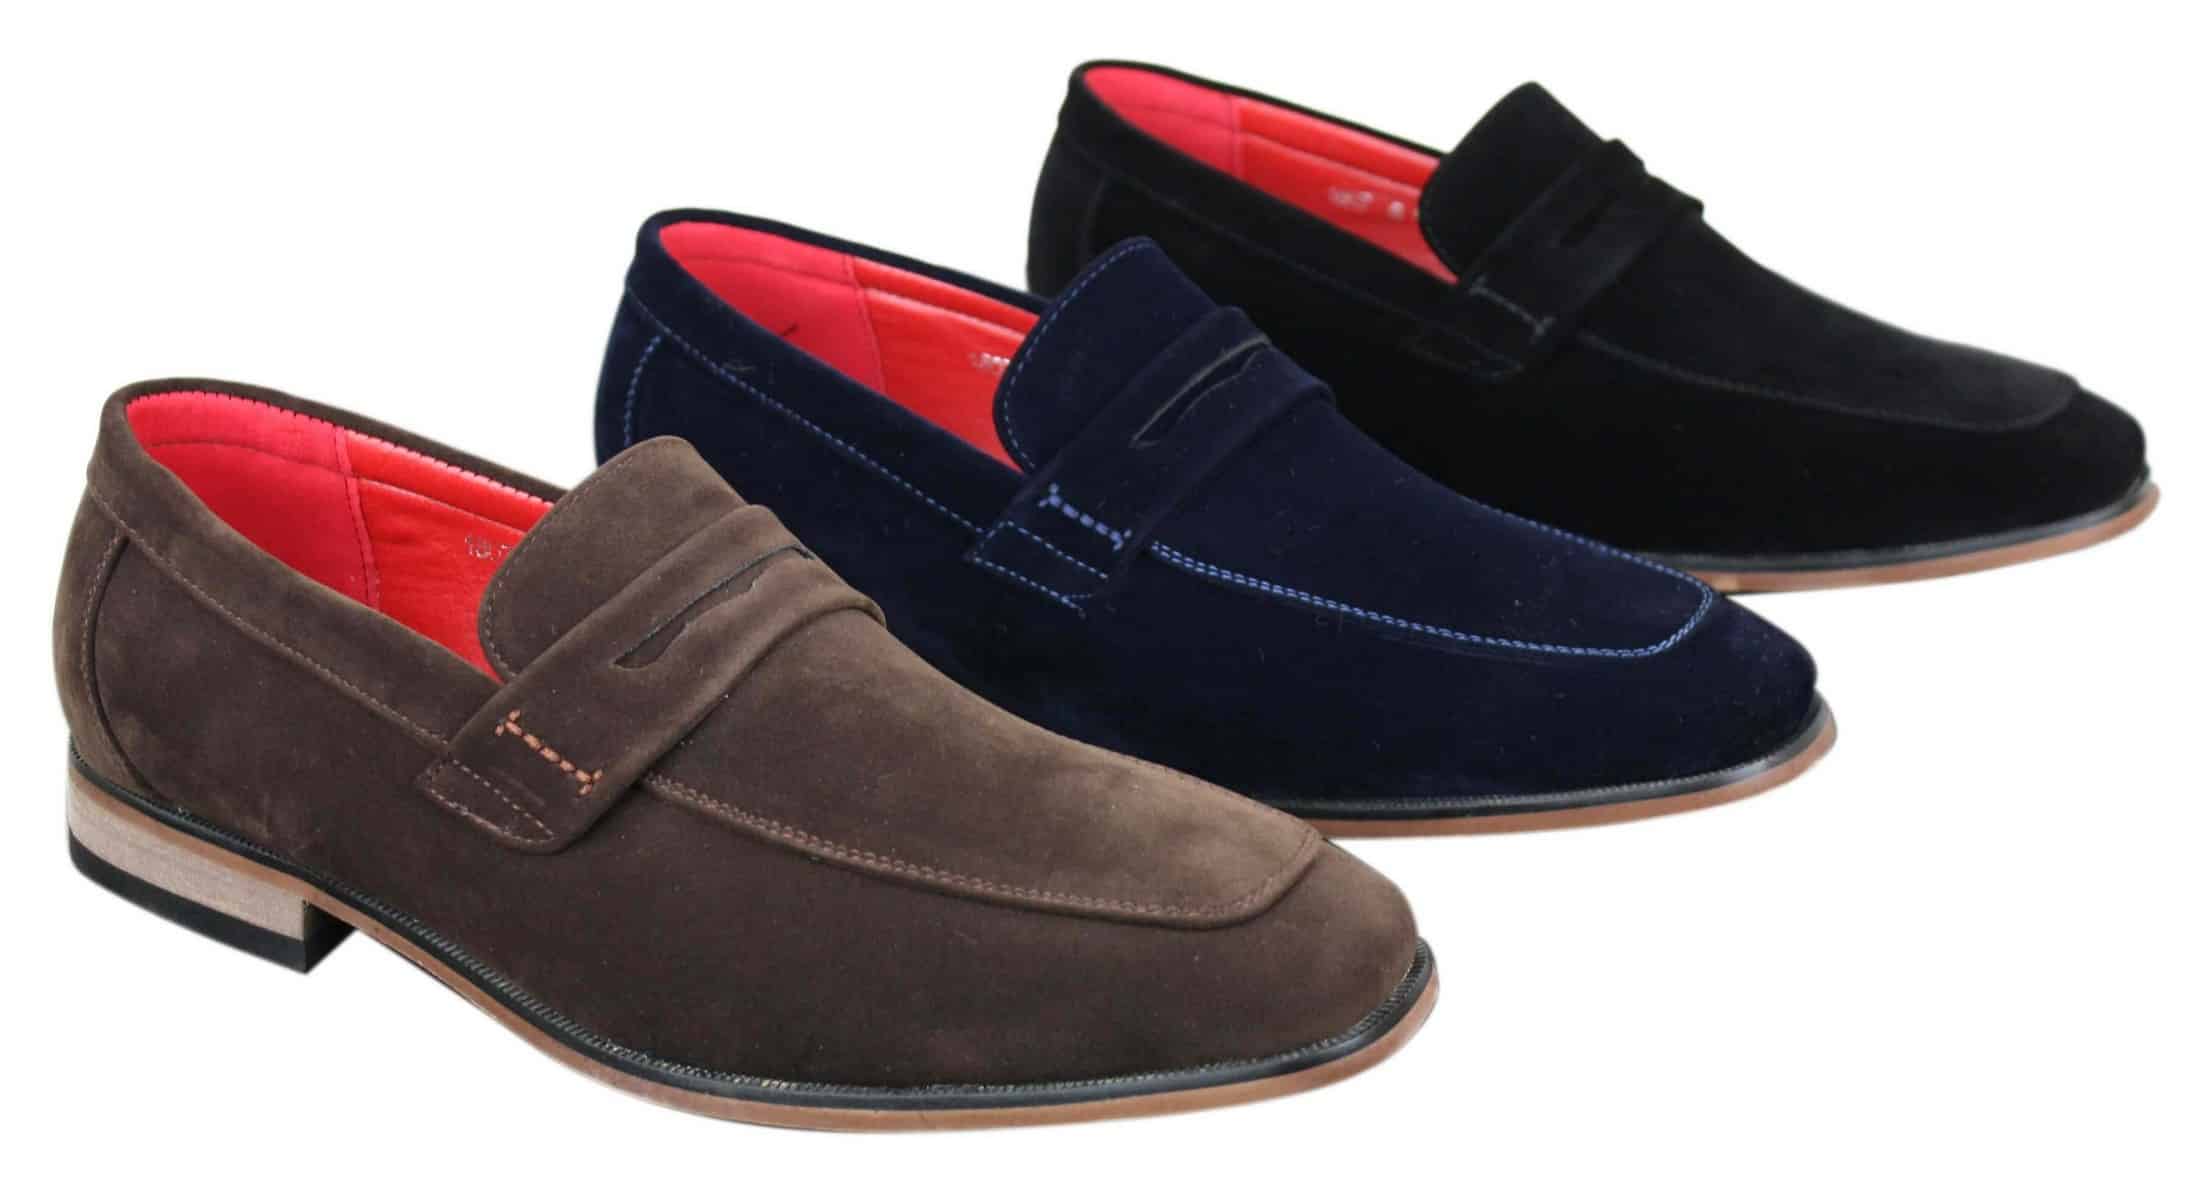 New Mens Faux Suede Casual Loafers Italian Slip On Driving Shoes Moccasins UK 